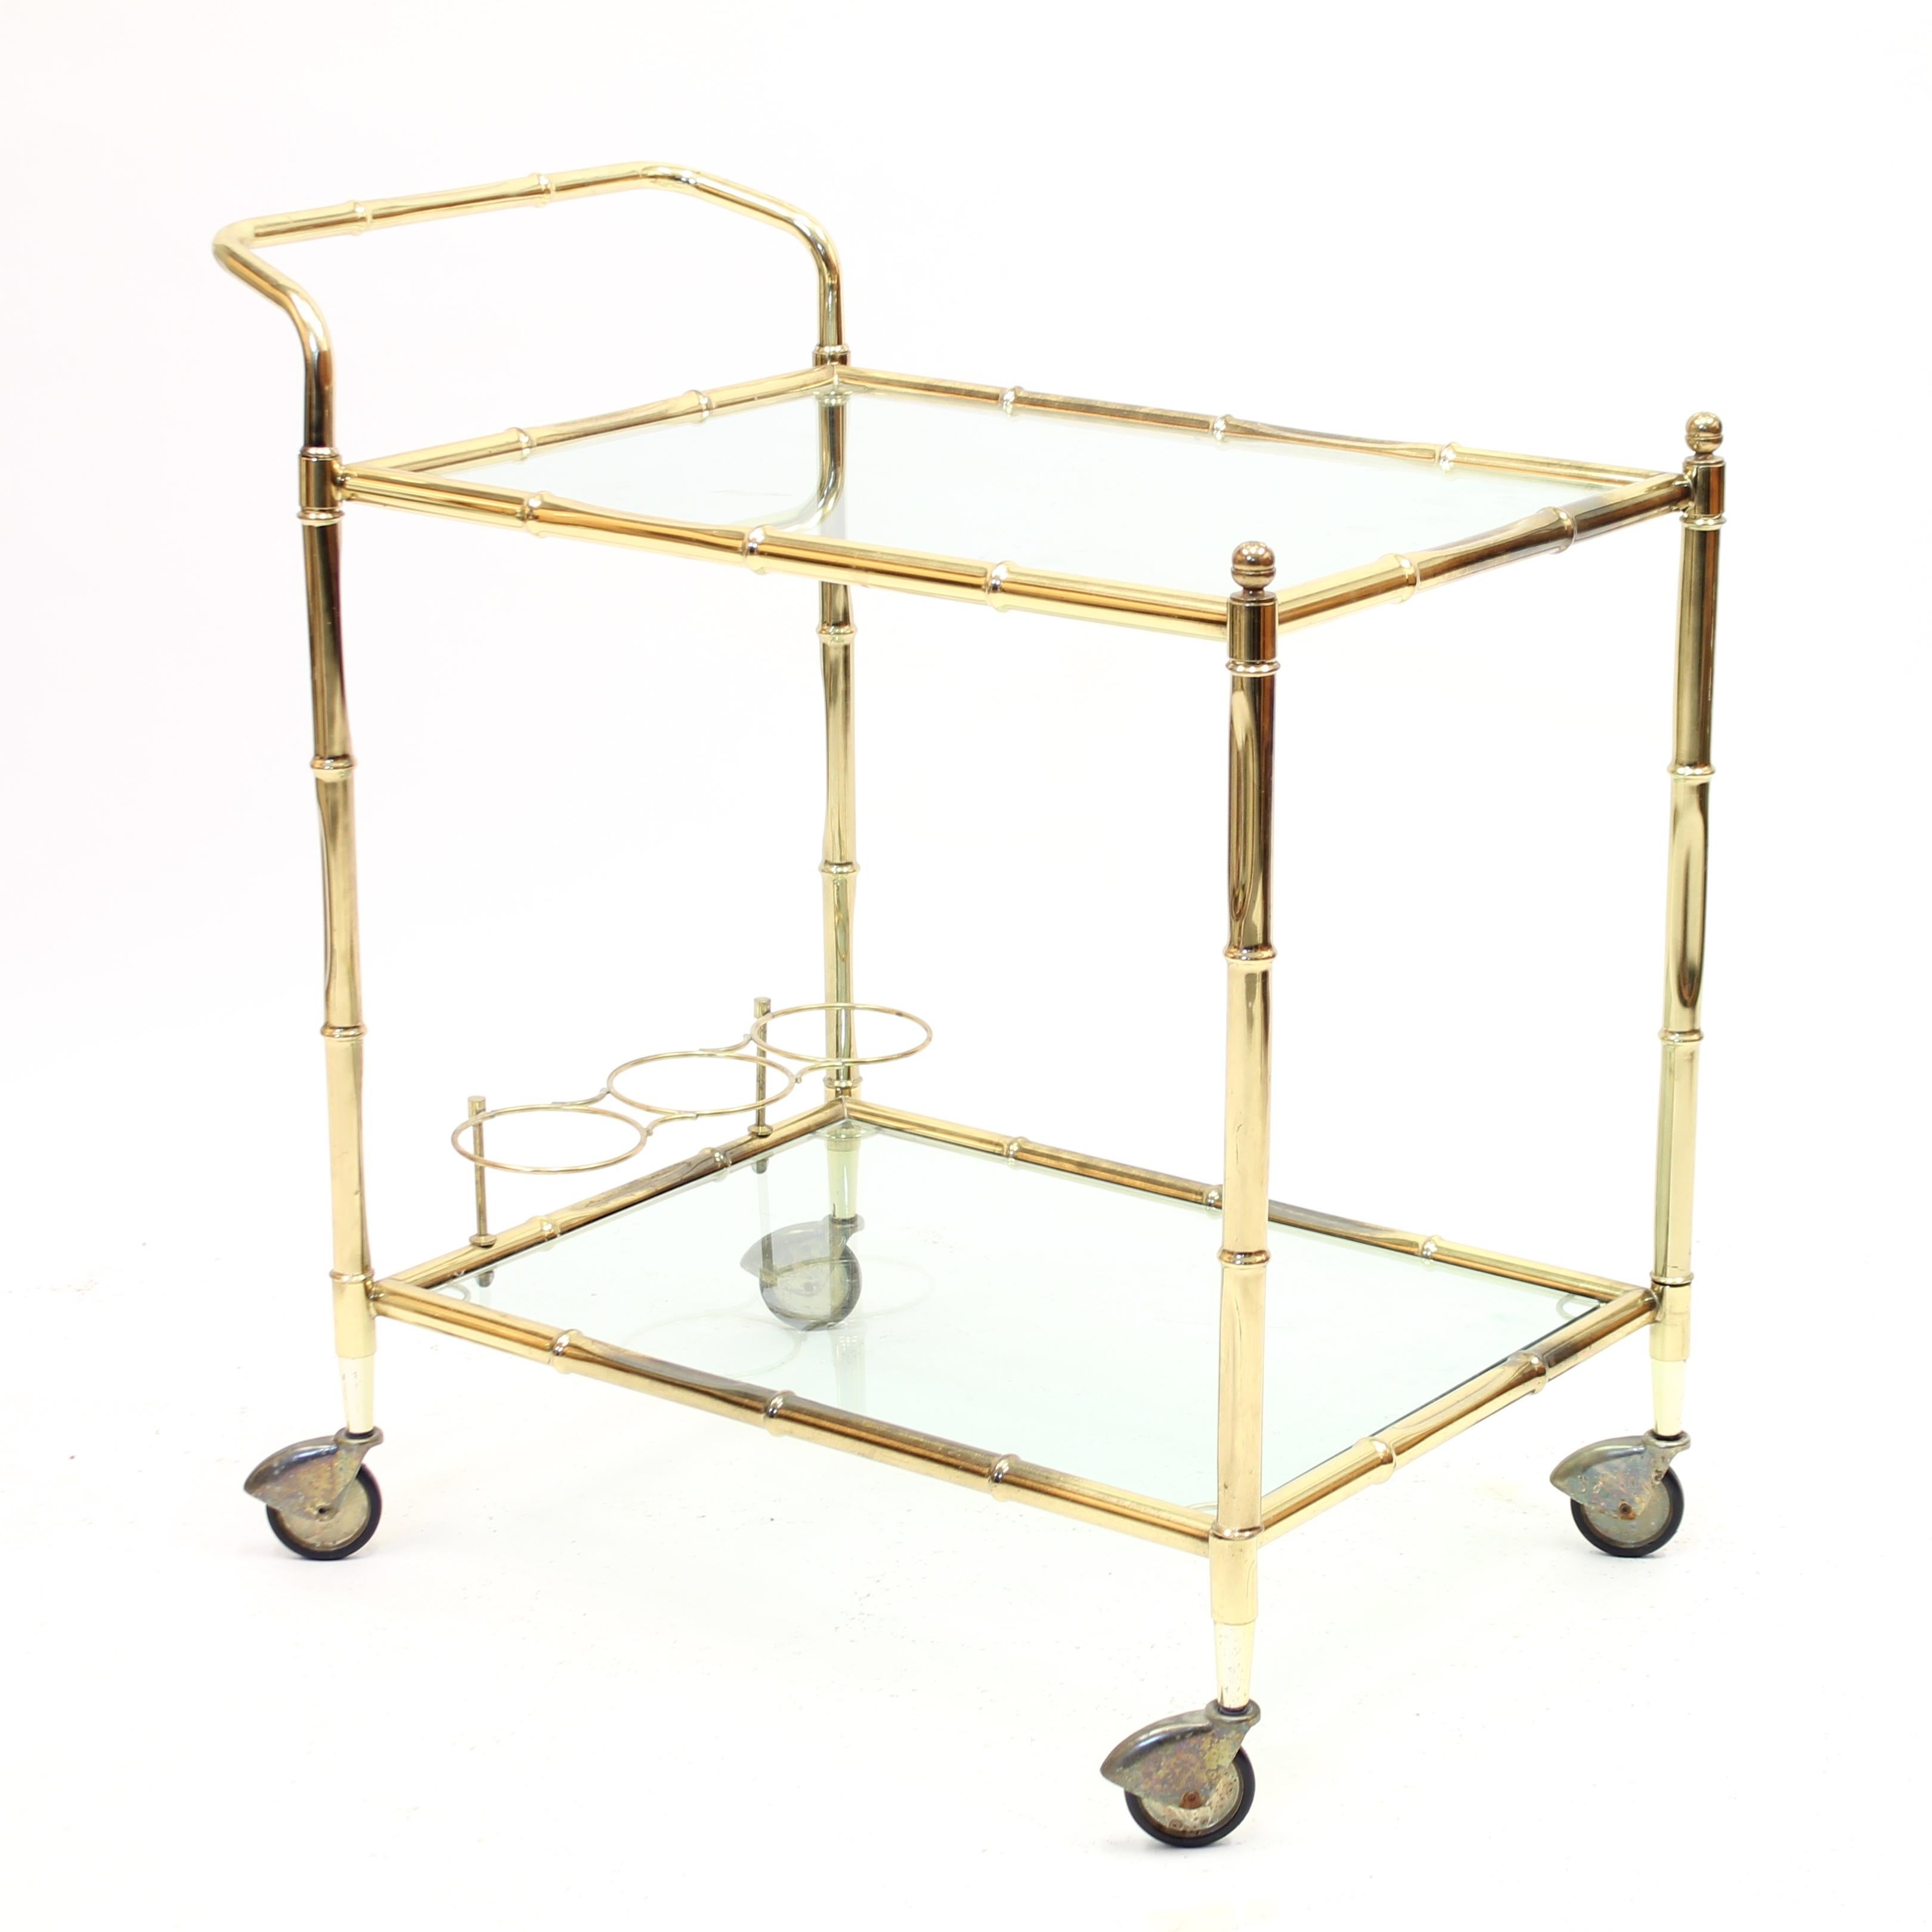 Brass bar cart / trolley with bambu shaped tubular brass rods that makes up the frame. Two levels with glass shelving and lower level with holder for three bottles. Good vintage condition with light ware and patina consistent with age and use.